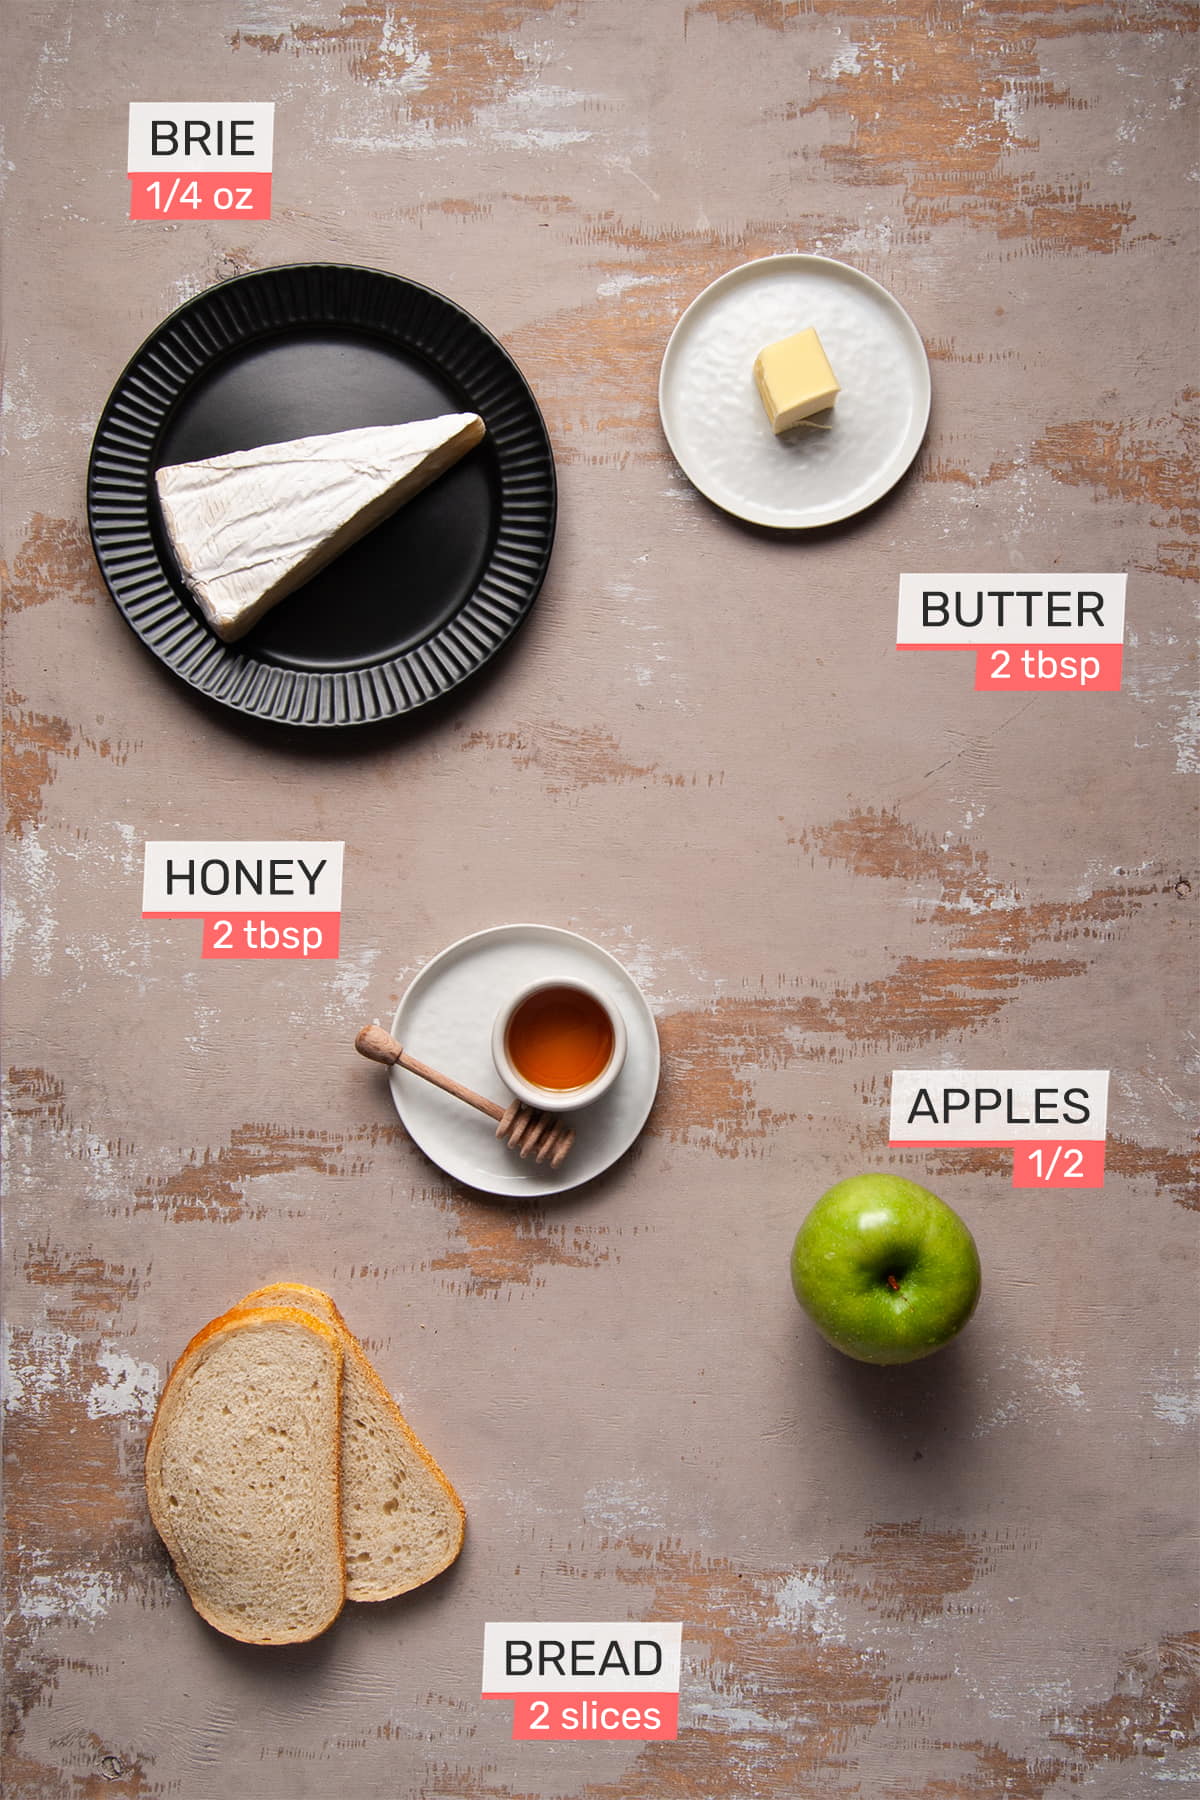 overhead view of all ingredients needed for an apple and brie sandwich on a light wooden background - brie, butter, honey, apple, and bread